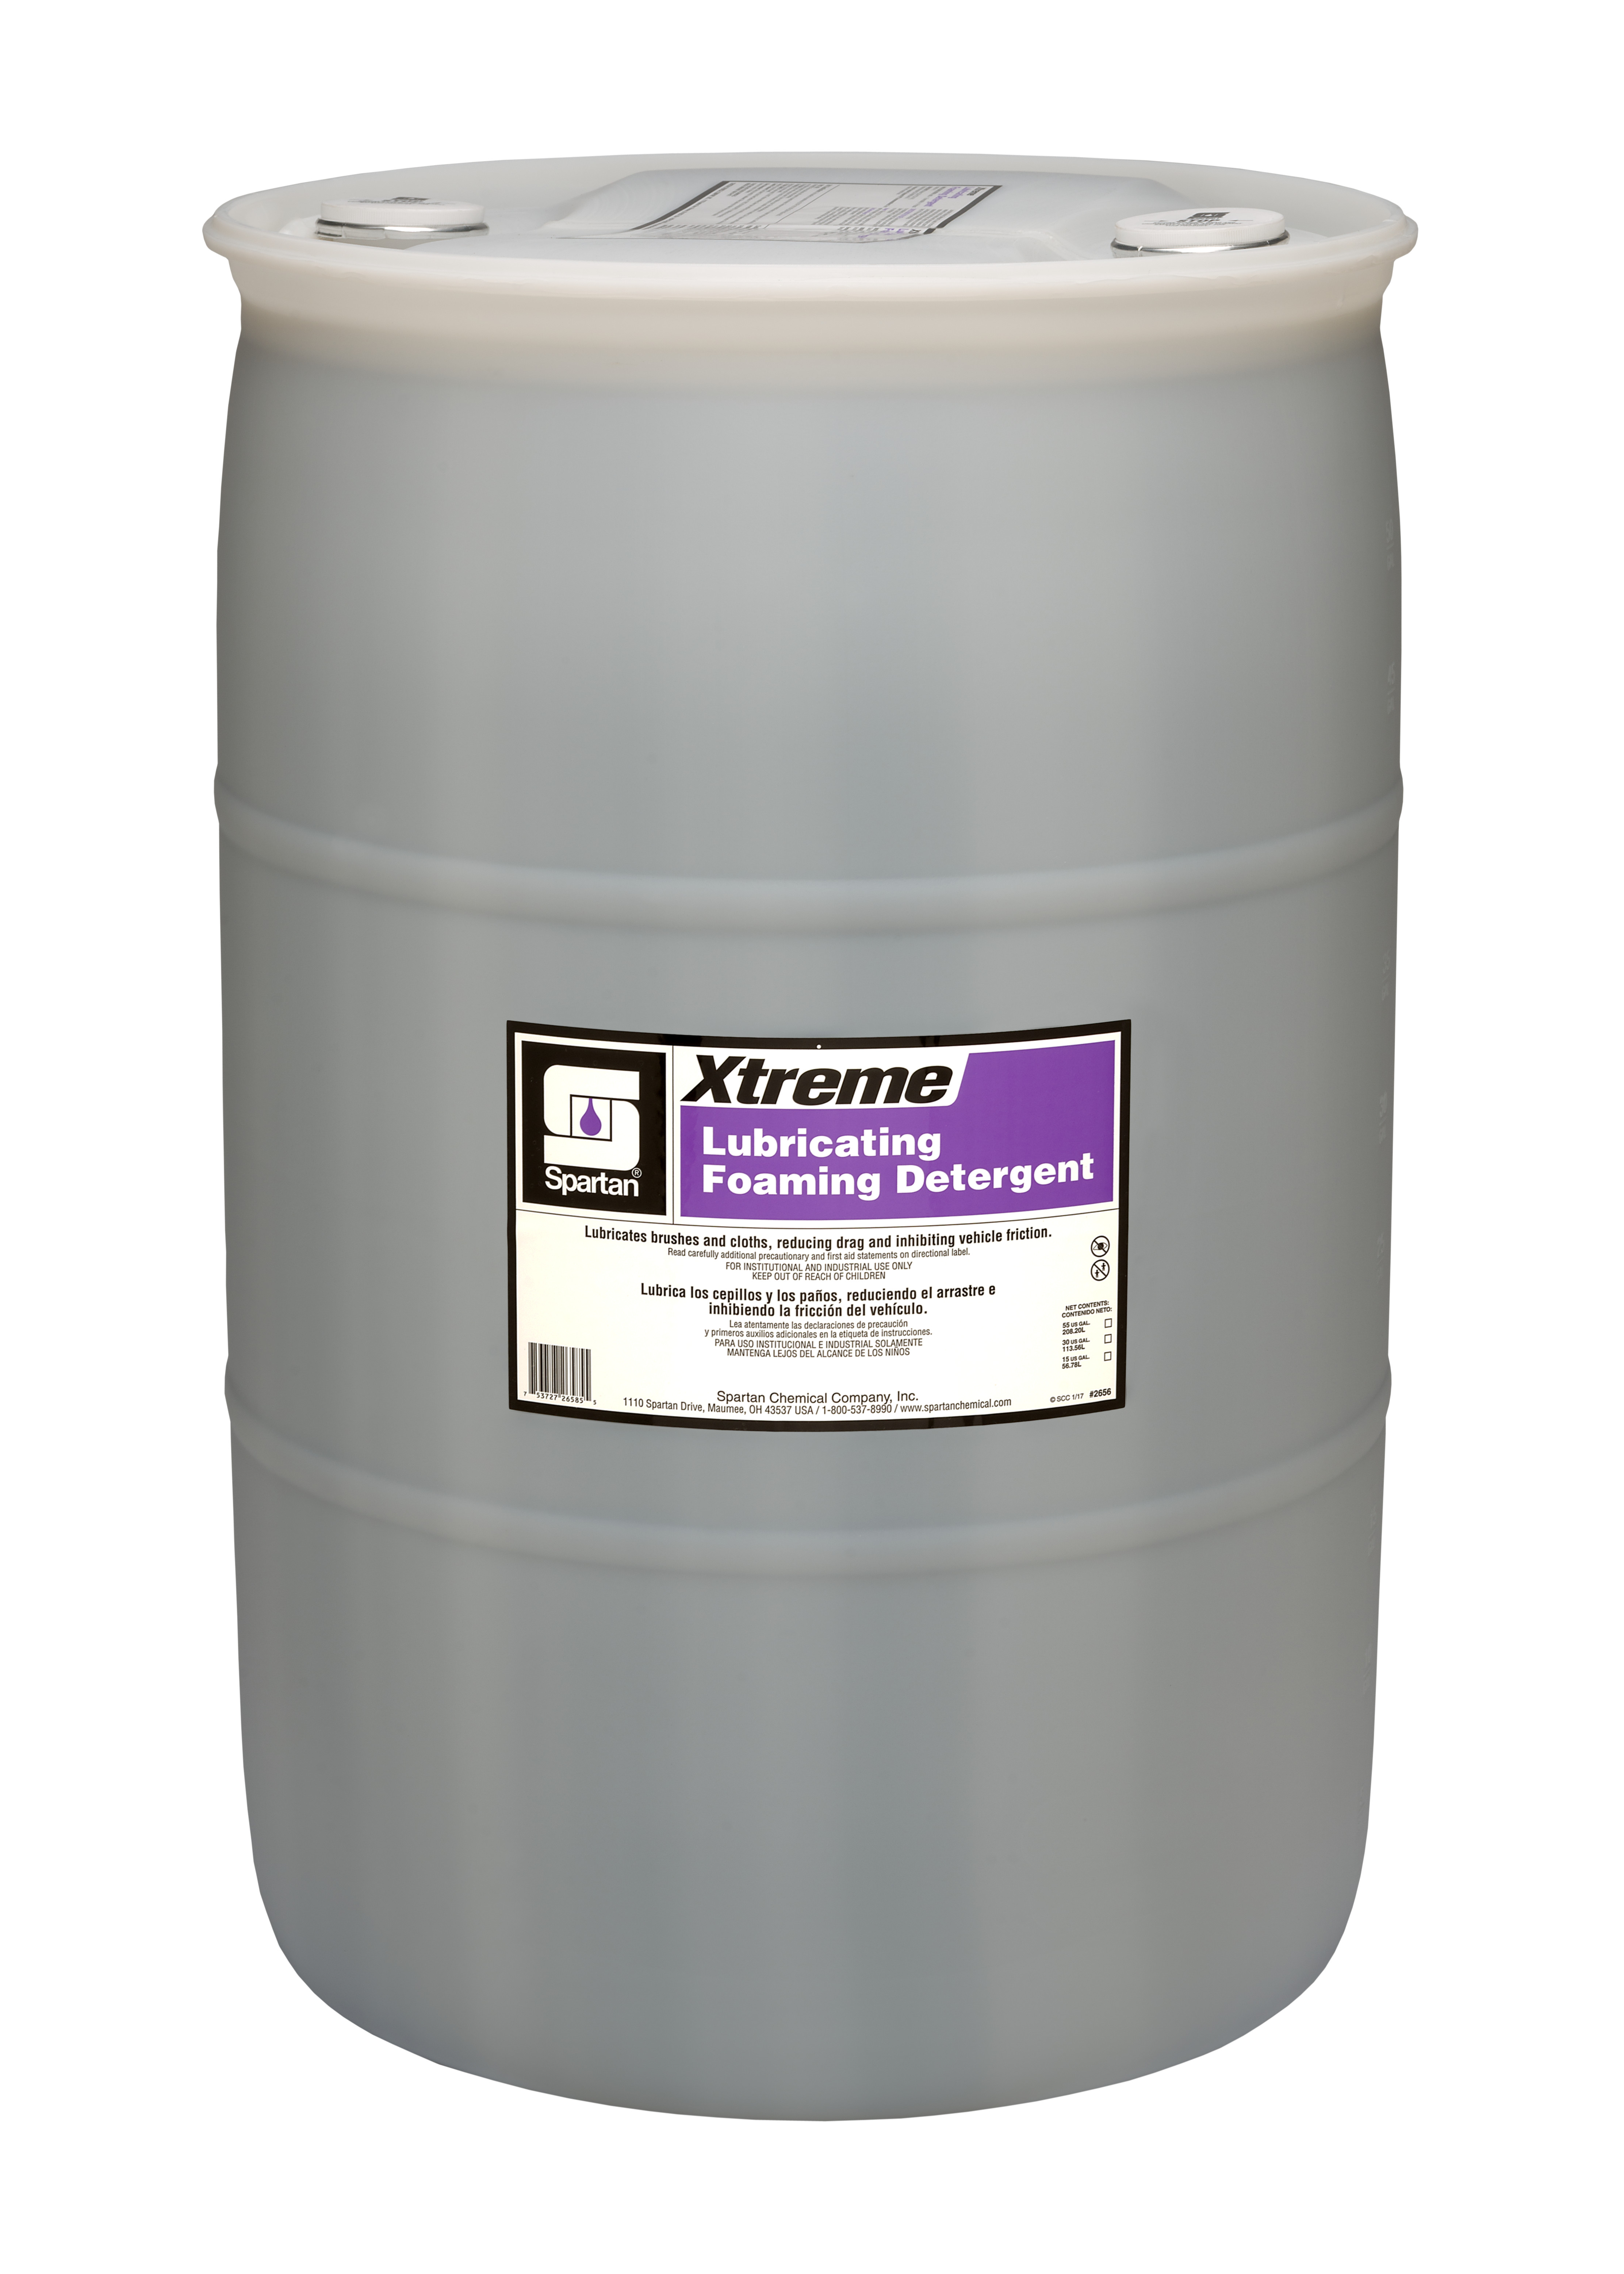 Spartan Chemical Company Xtreme Lubricating Foaming Detergent, 55 GAL DRUM